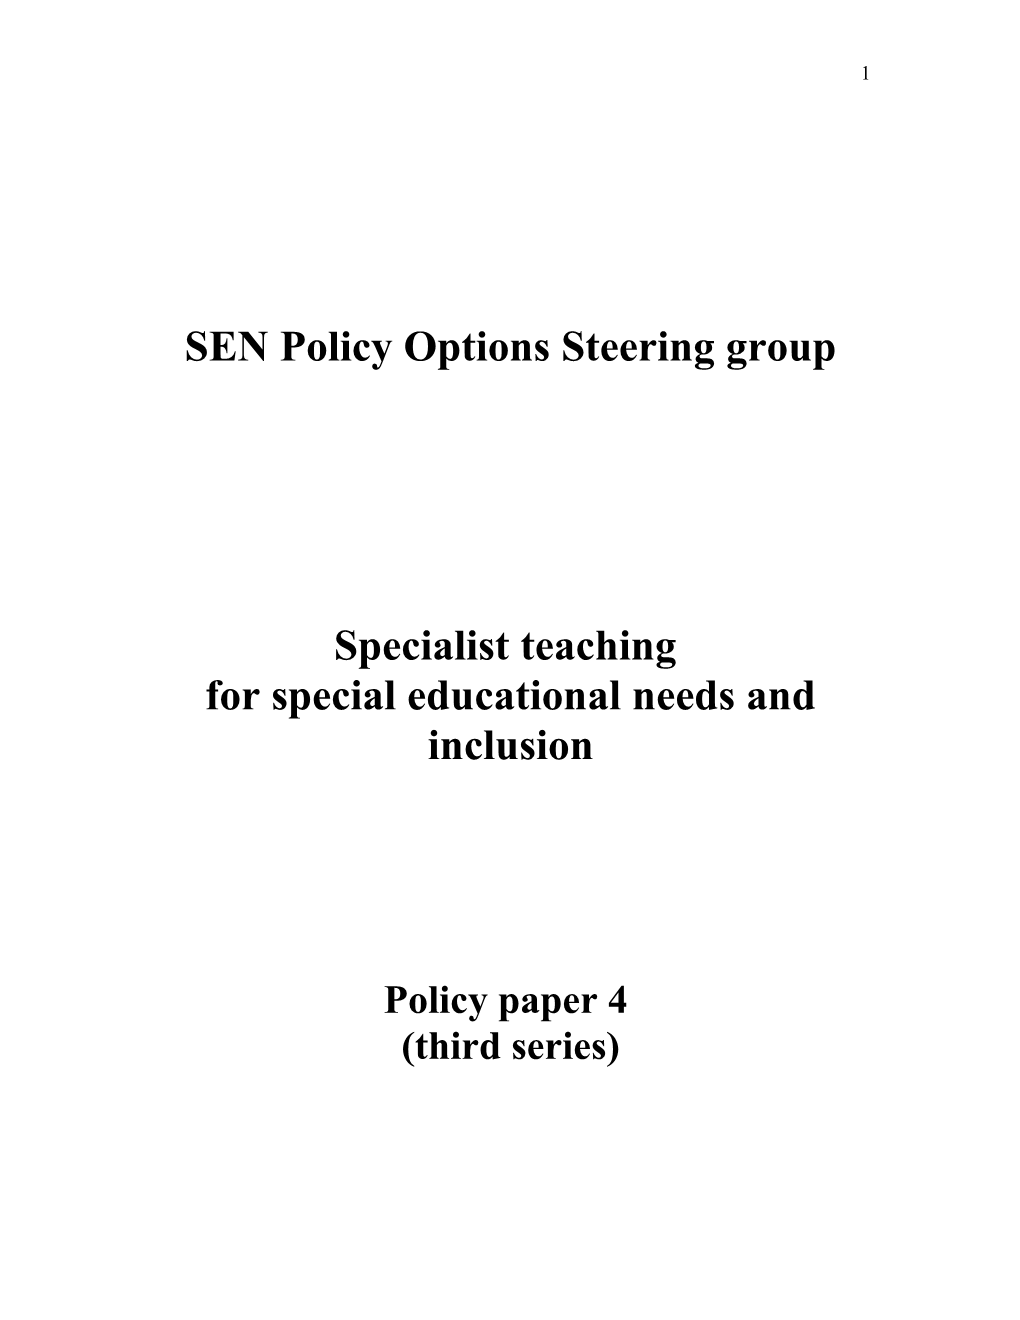 SEN Policy Options Steering Group